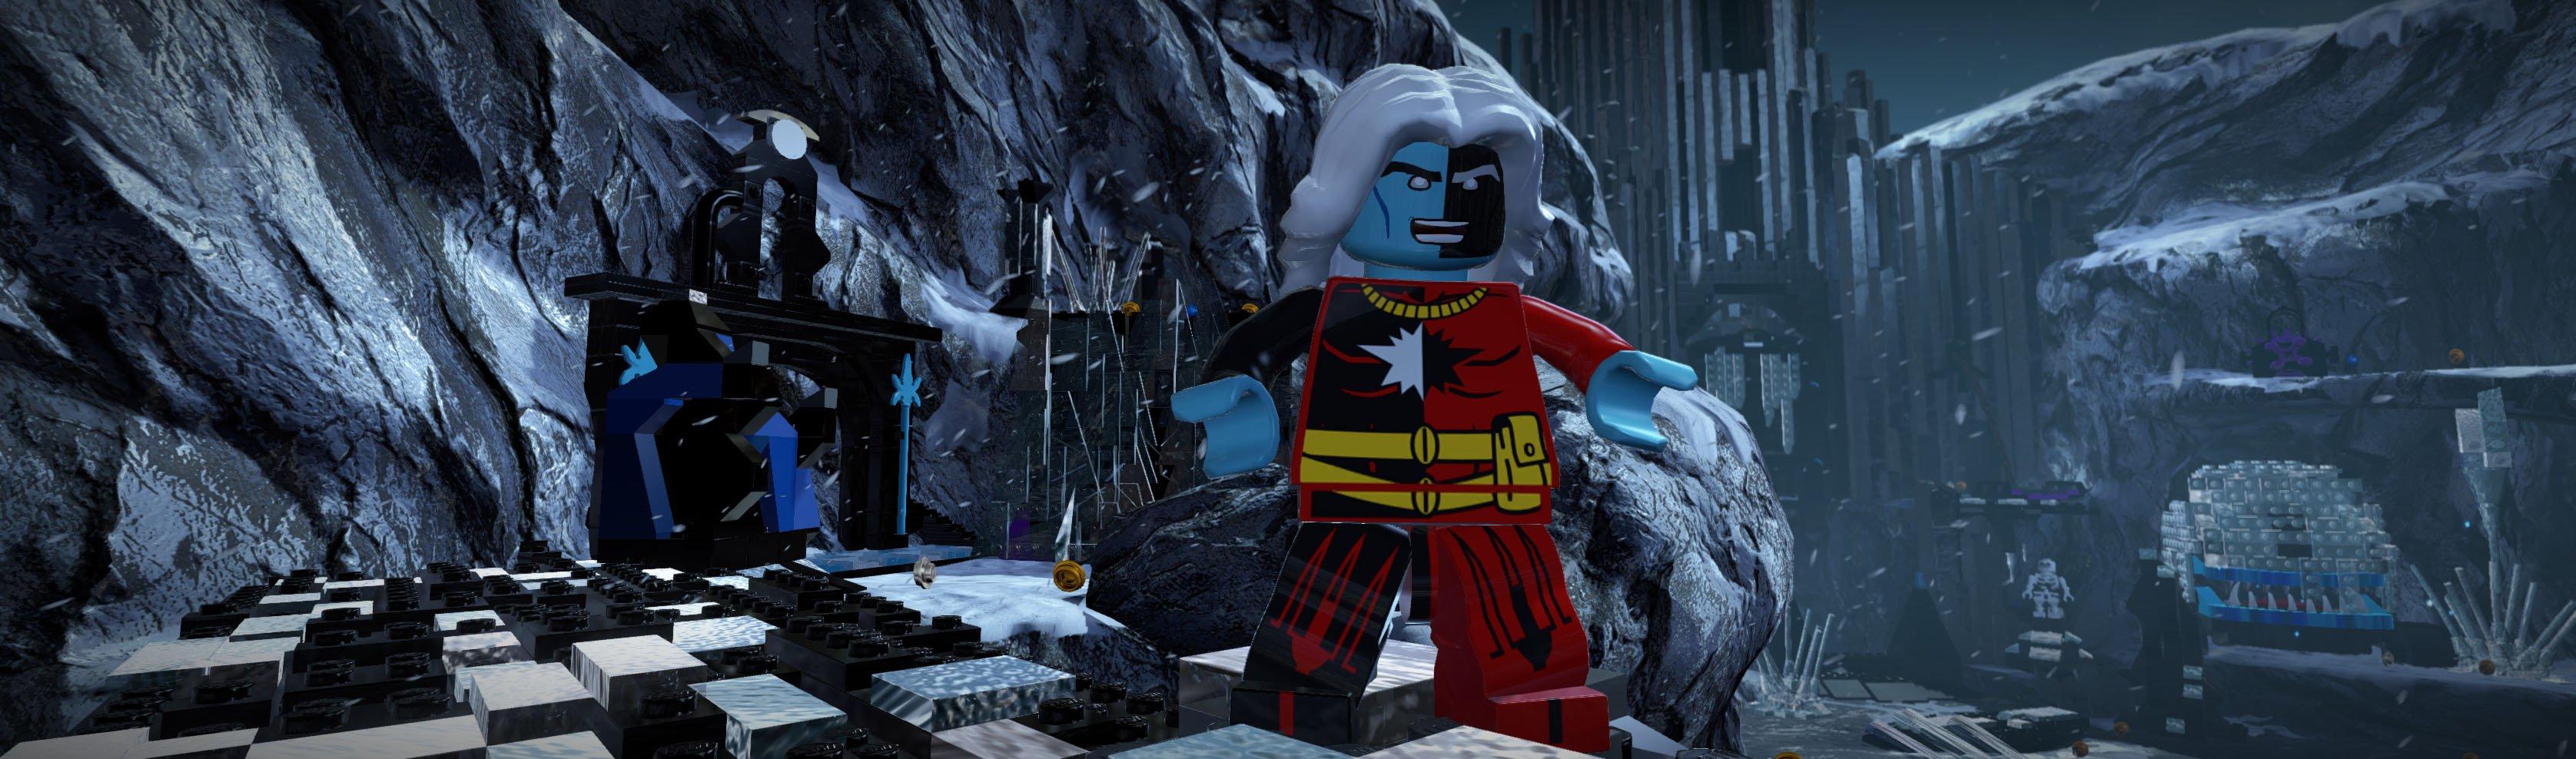 Lego Marvel Super Heroes 2 coming to PC, PS4, Switch, Xbox One - Polygon